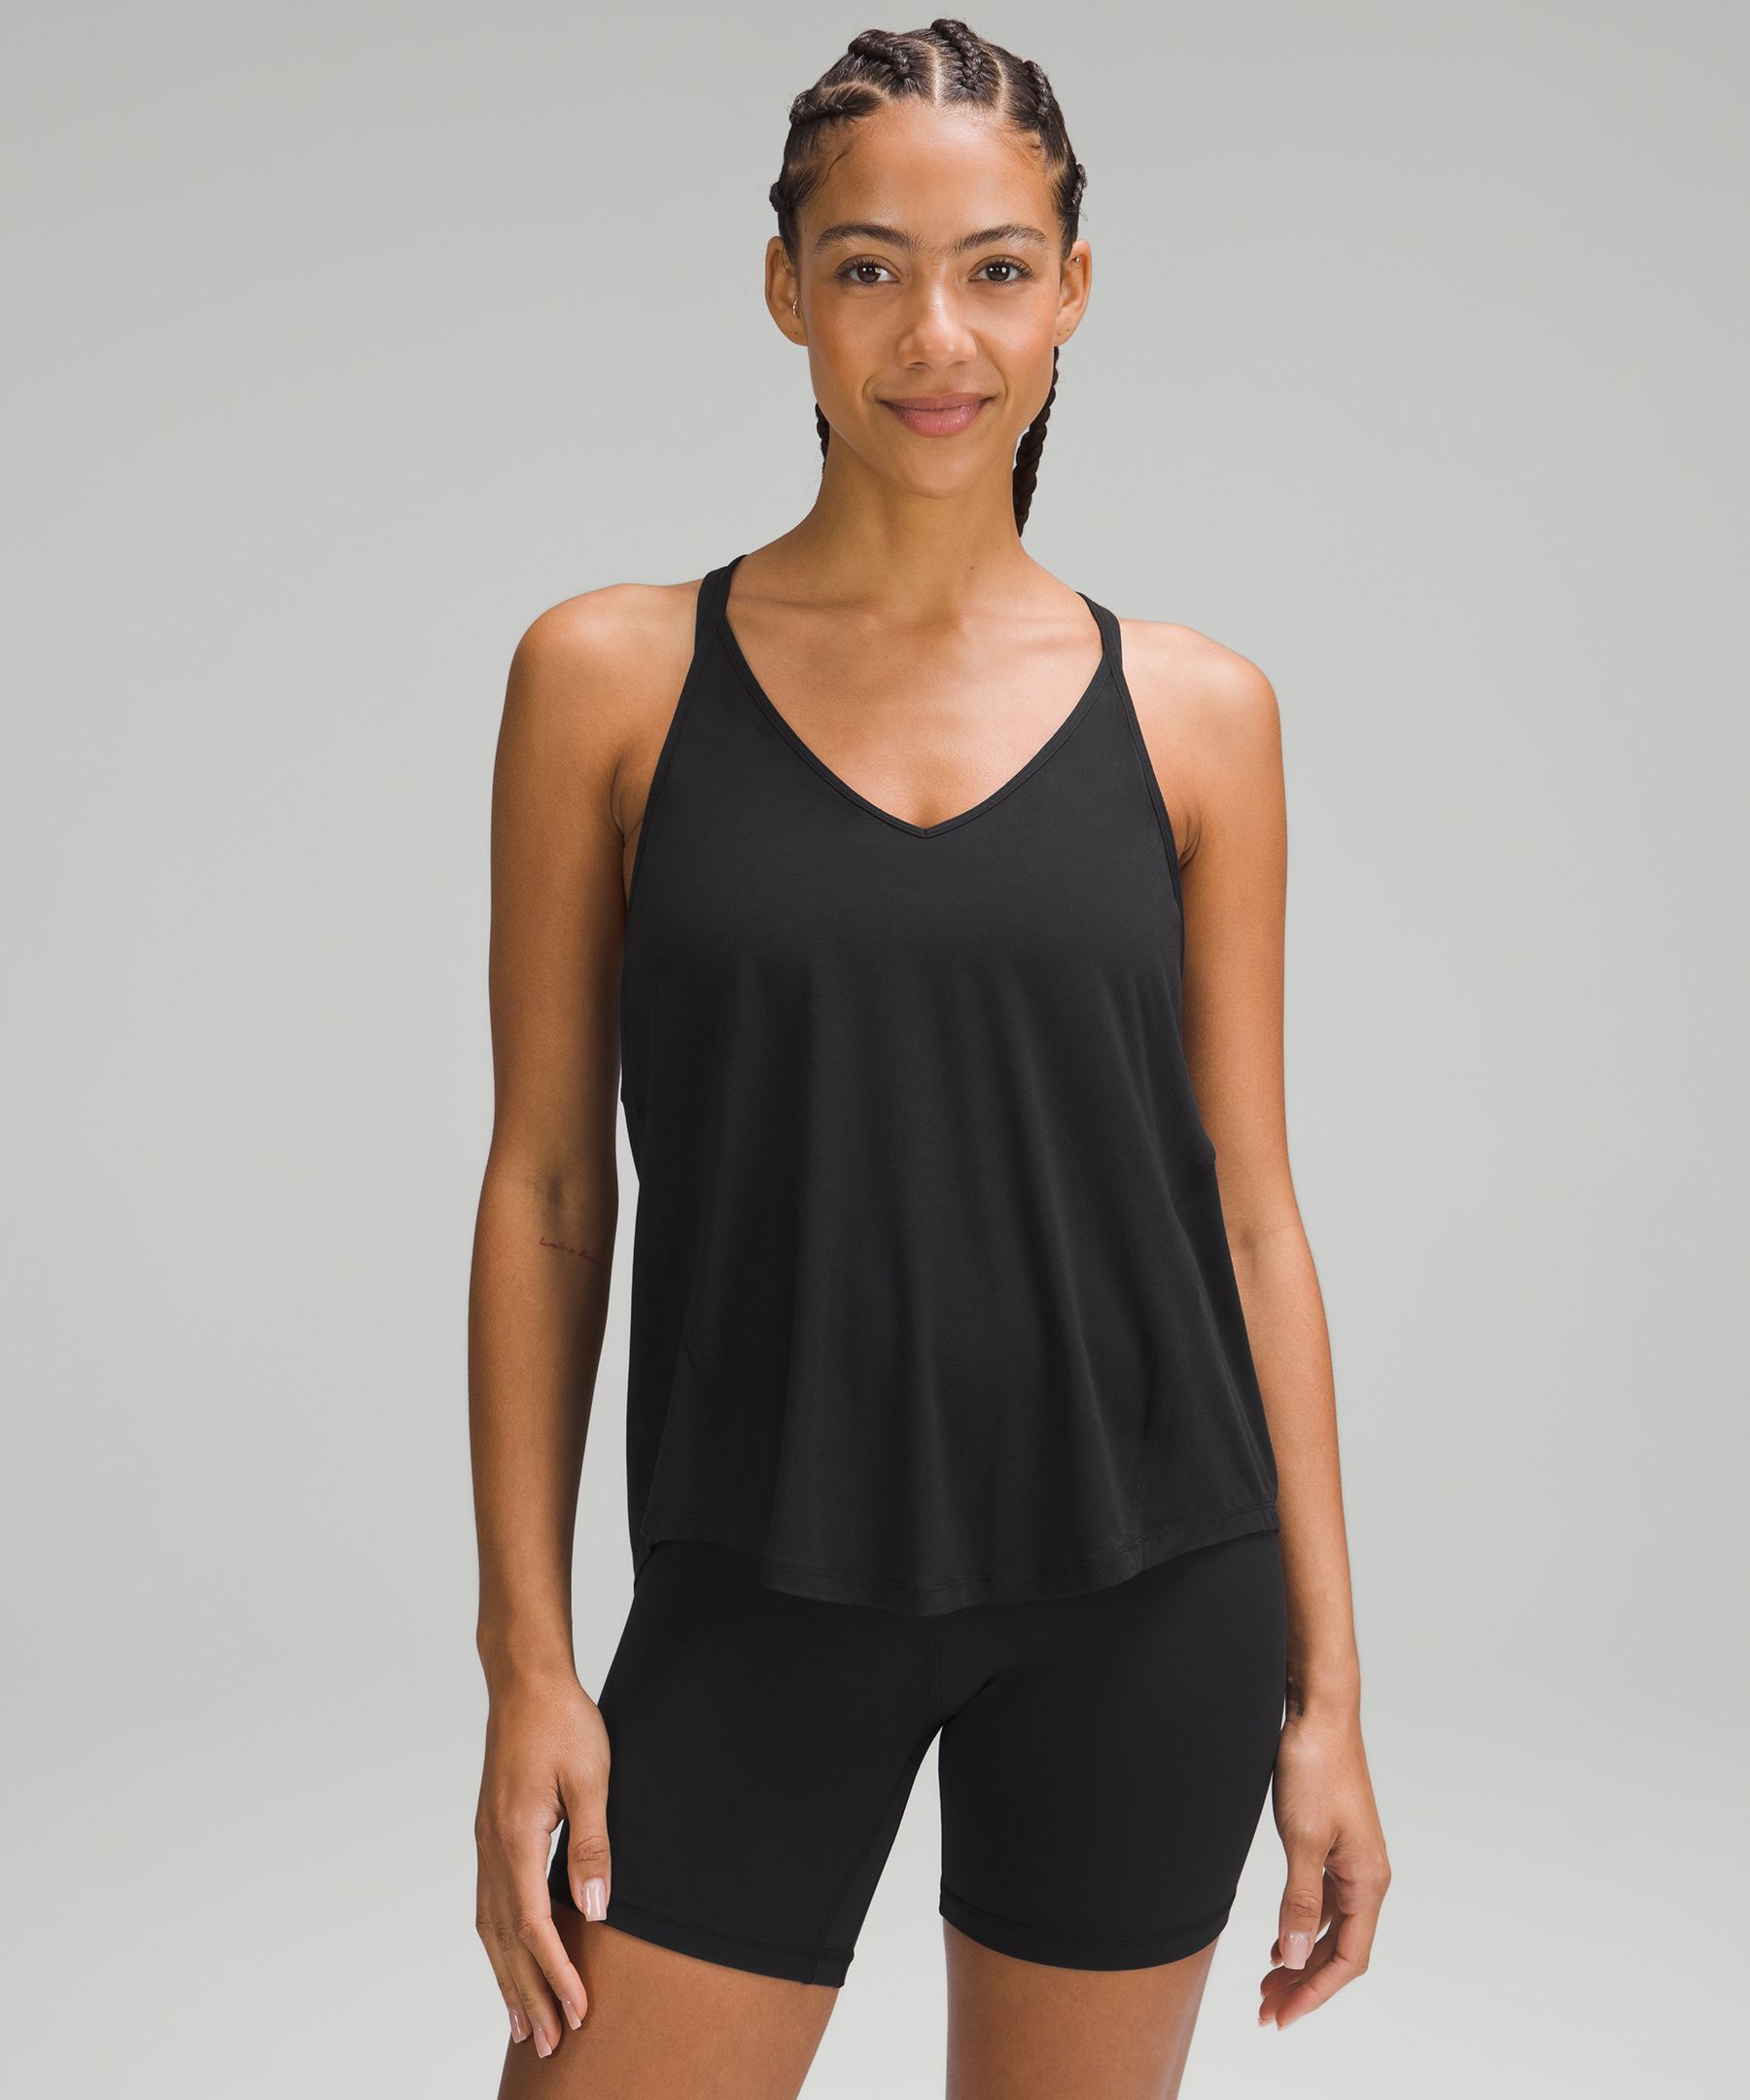 Nov 3, 2023 · The Lululemon Balancer Tank Top is a great activewear piece!  This  dupe sells for only $24, while Lululemon sells theirs for $68.  With a rating of 4.5